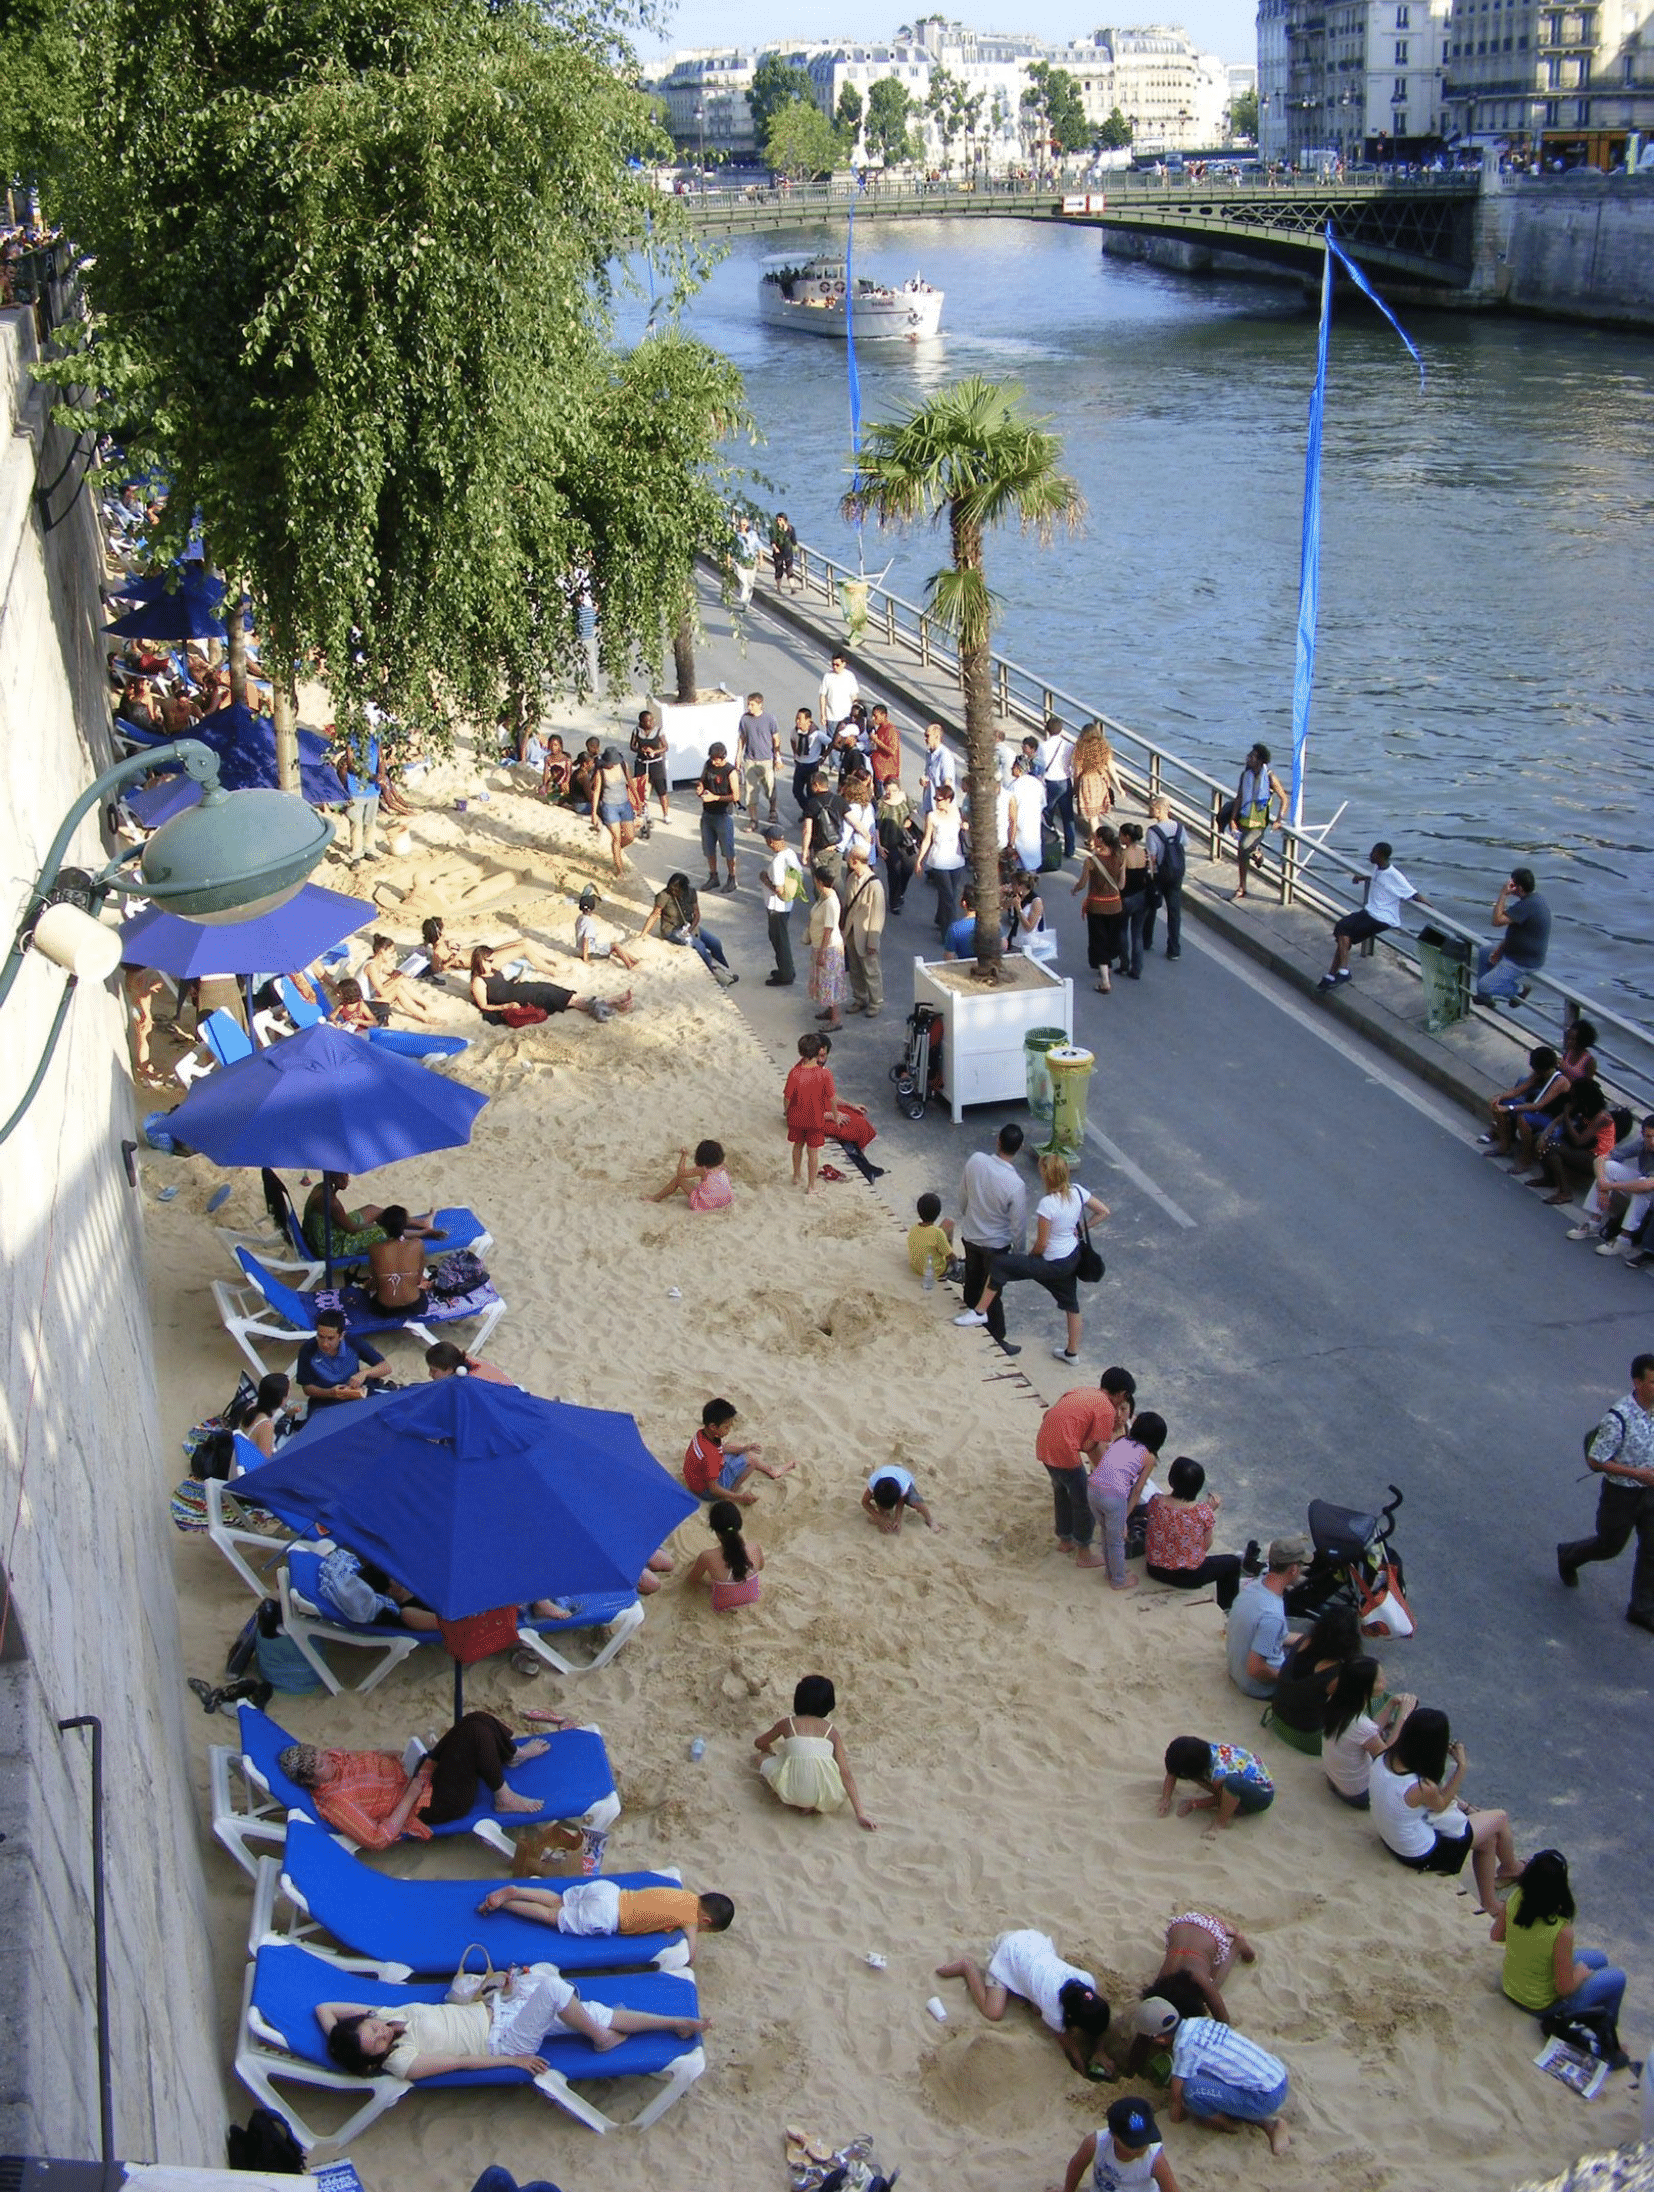 A picture of people relaxing on a small beach with blue umbrellas and a walkway next to the water